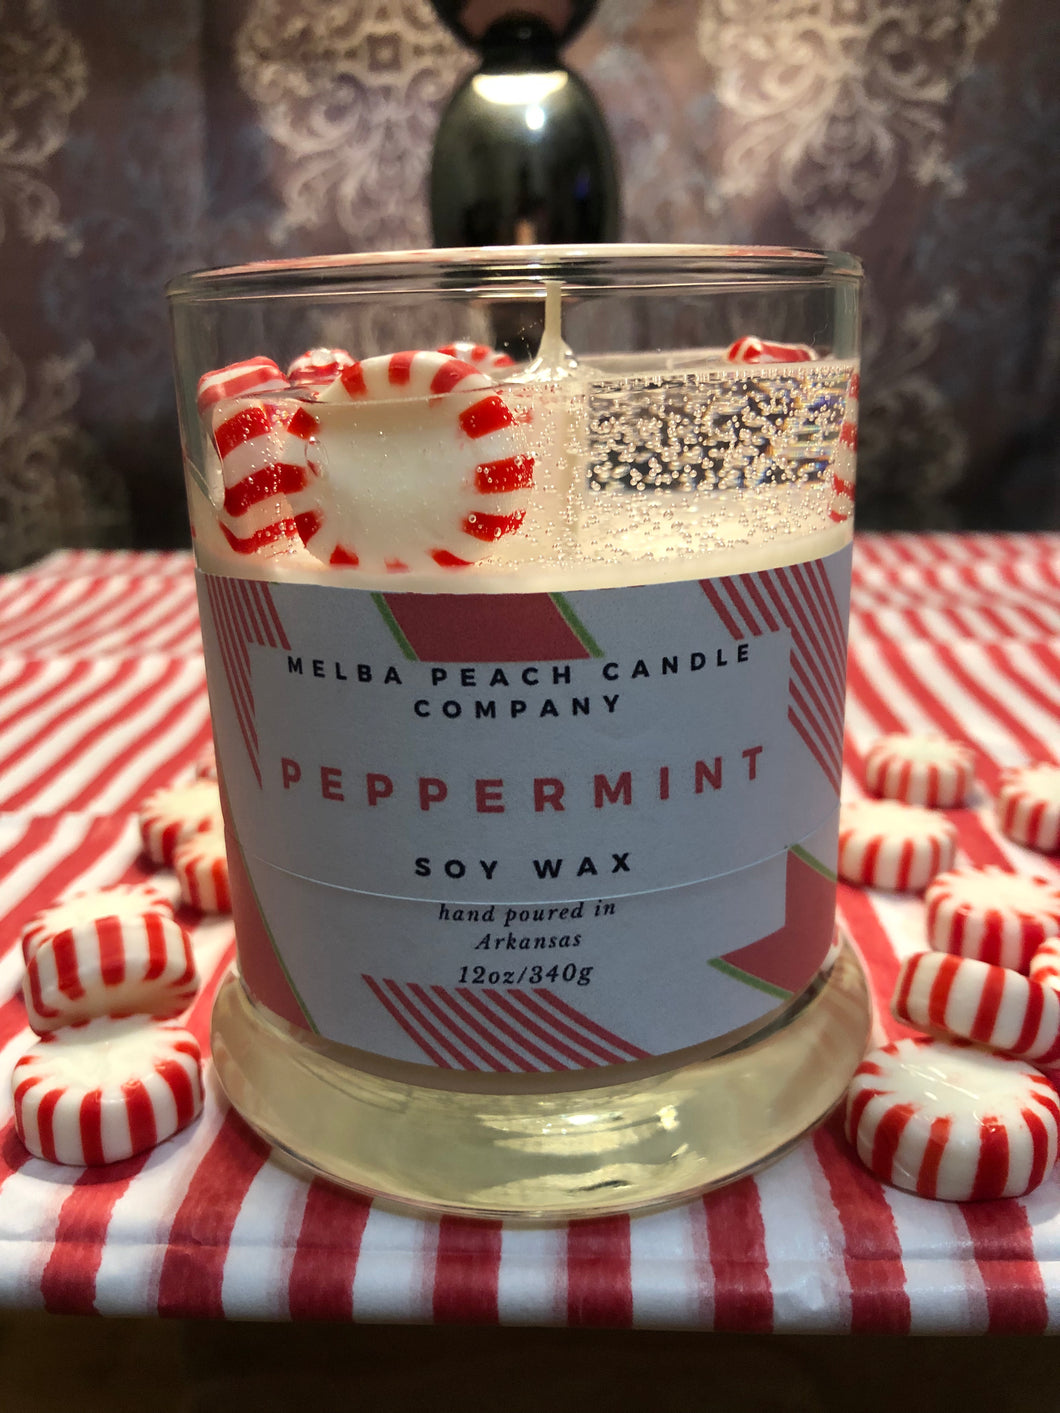 Peppermint Soywax Gelwax Candle 12oz